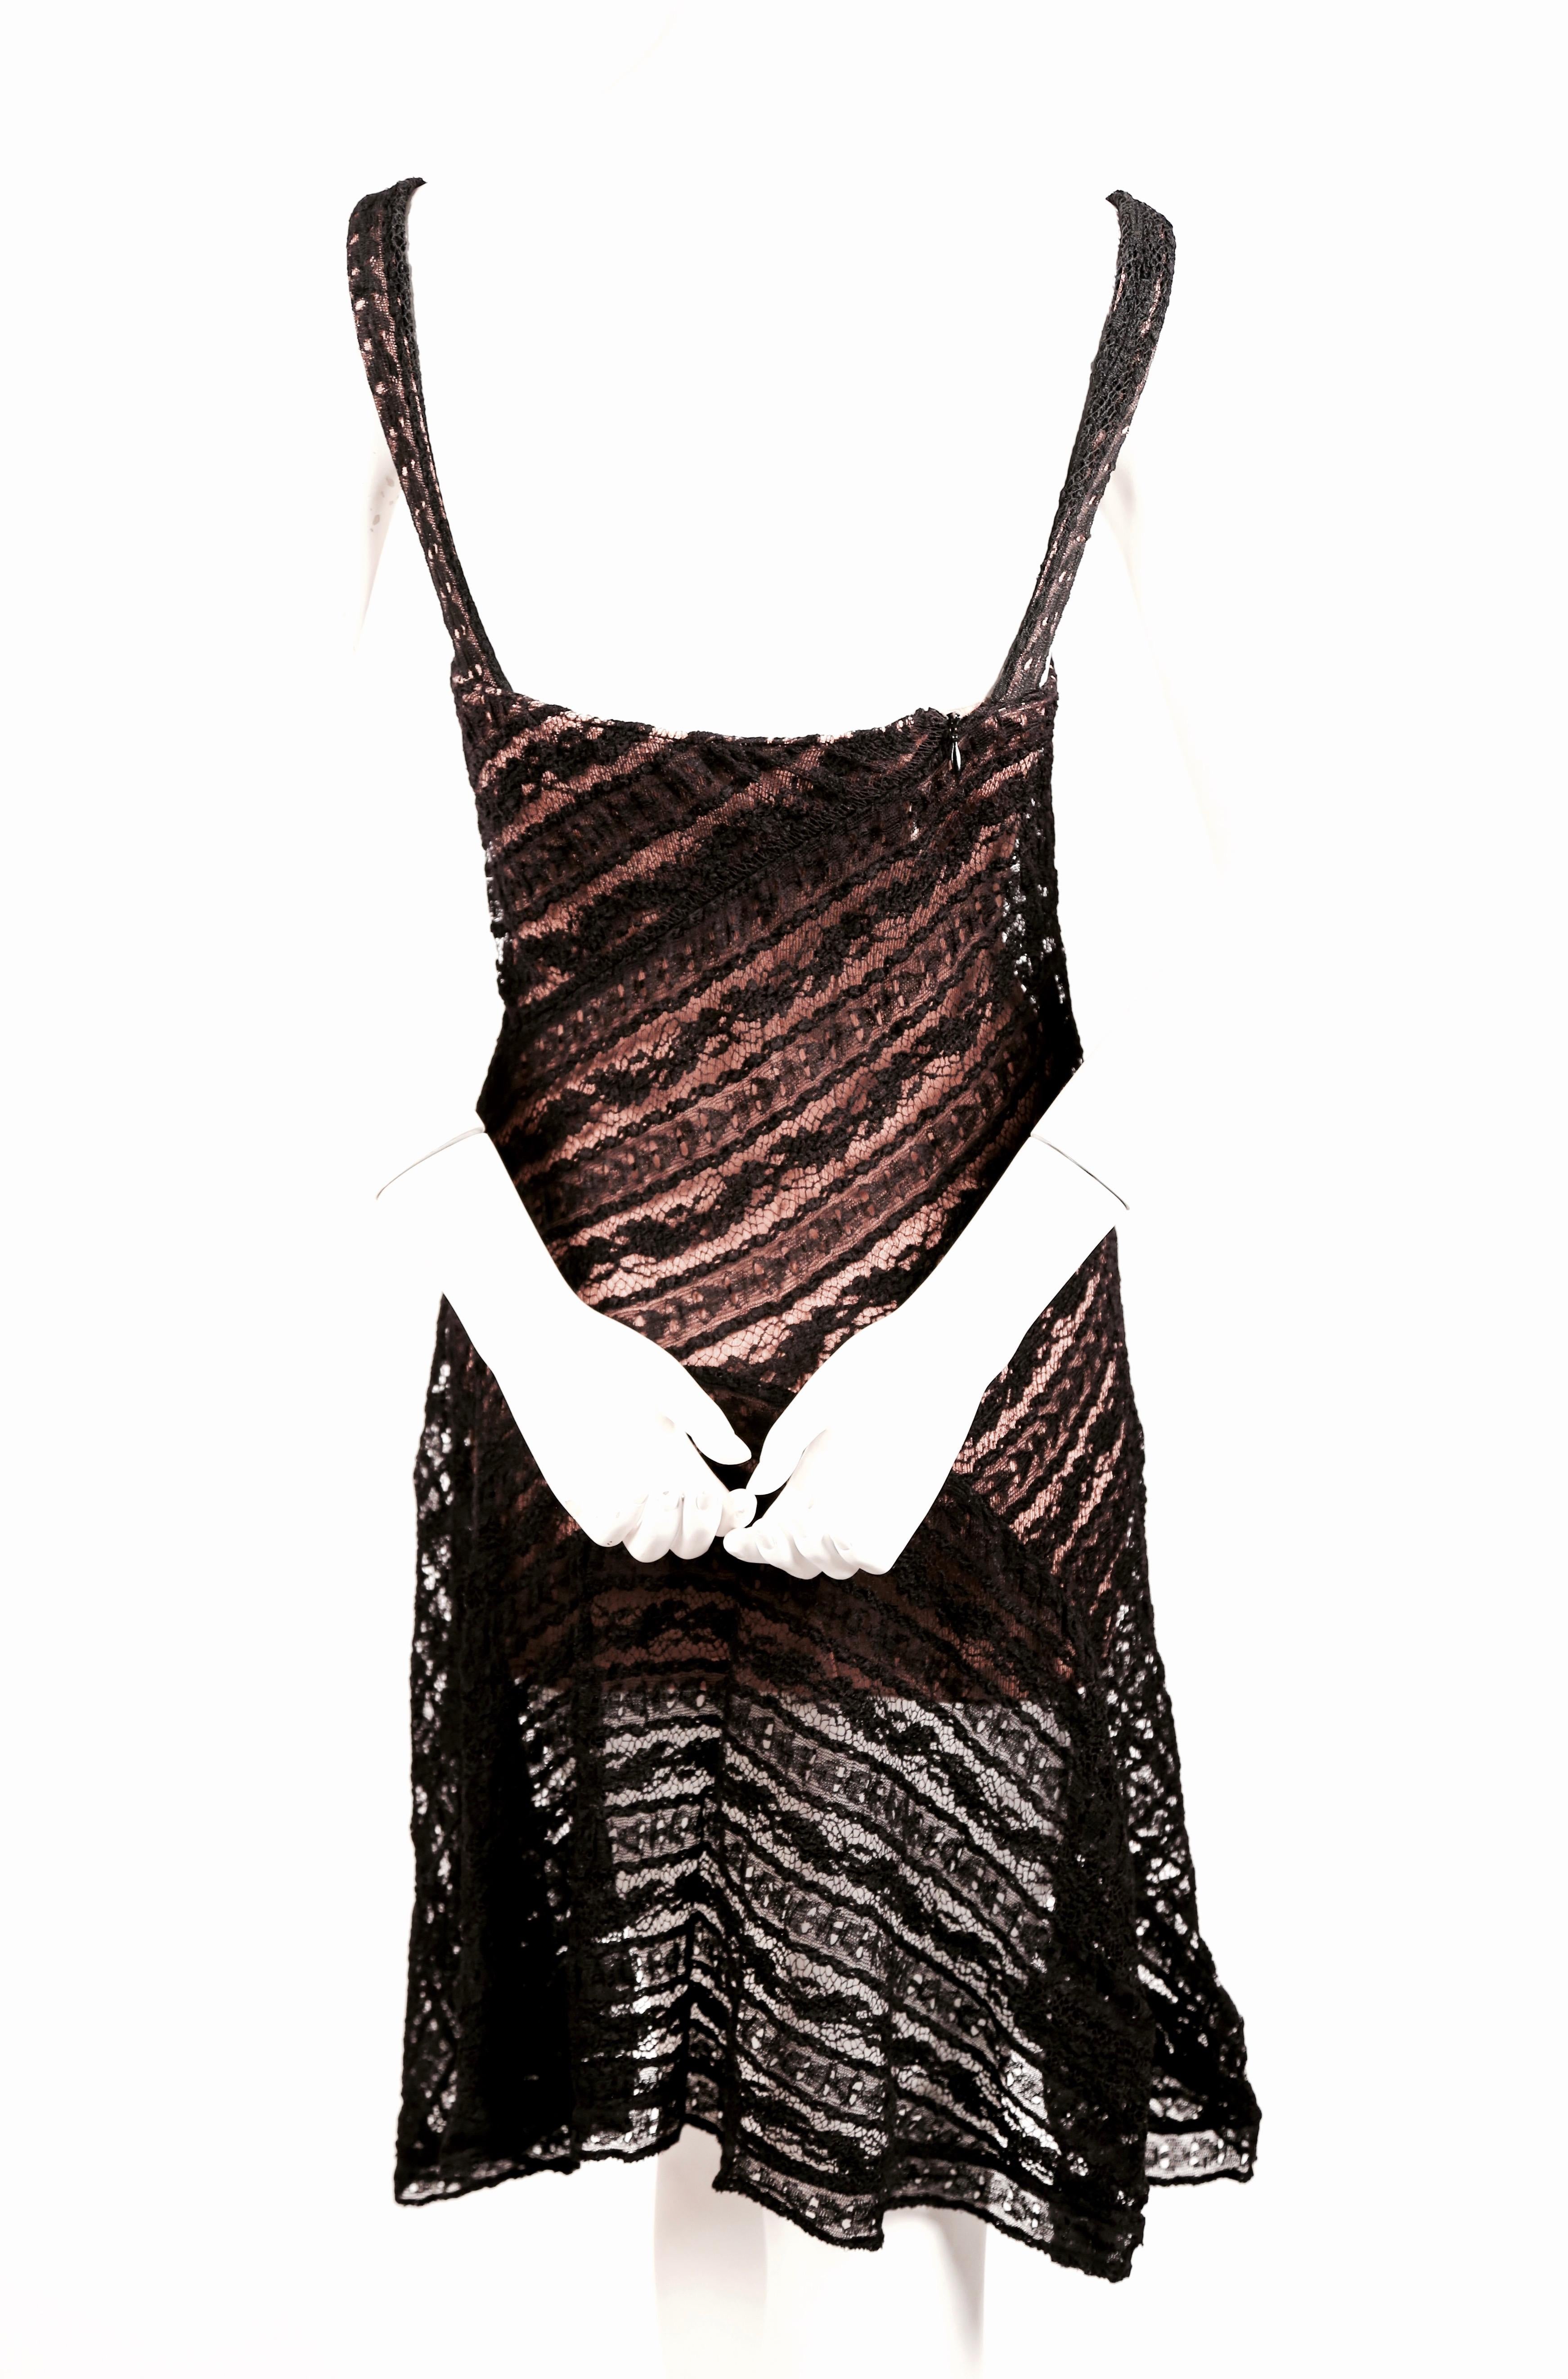 1993 AZZEDINE ALAIA black lace dress with molded bustier In Good Condition For Sale In San Fransisco, CA